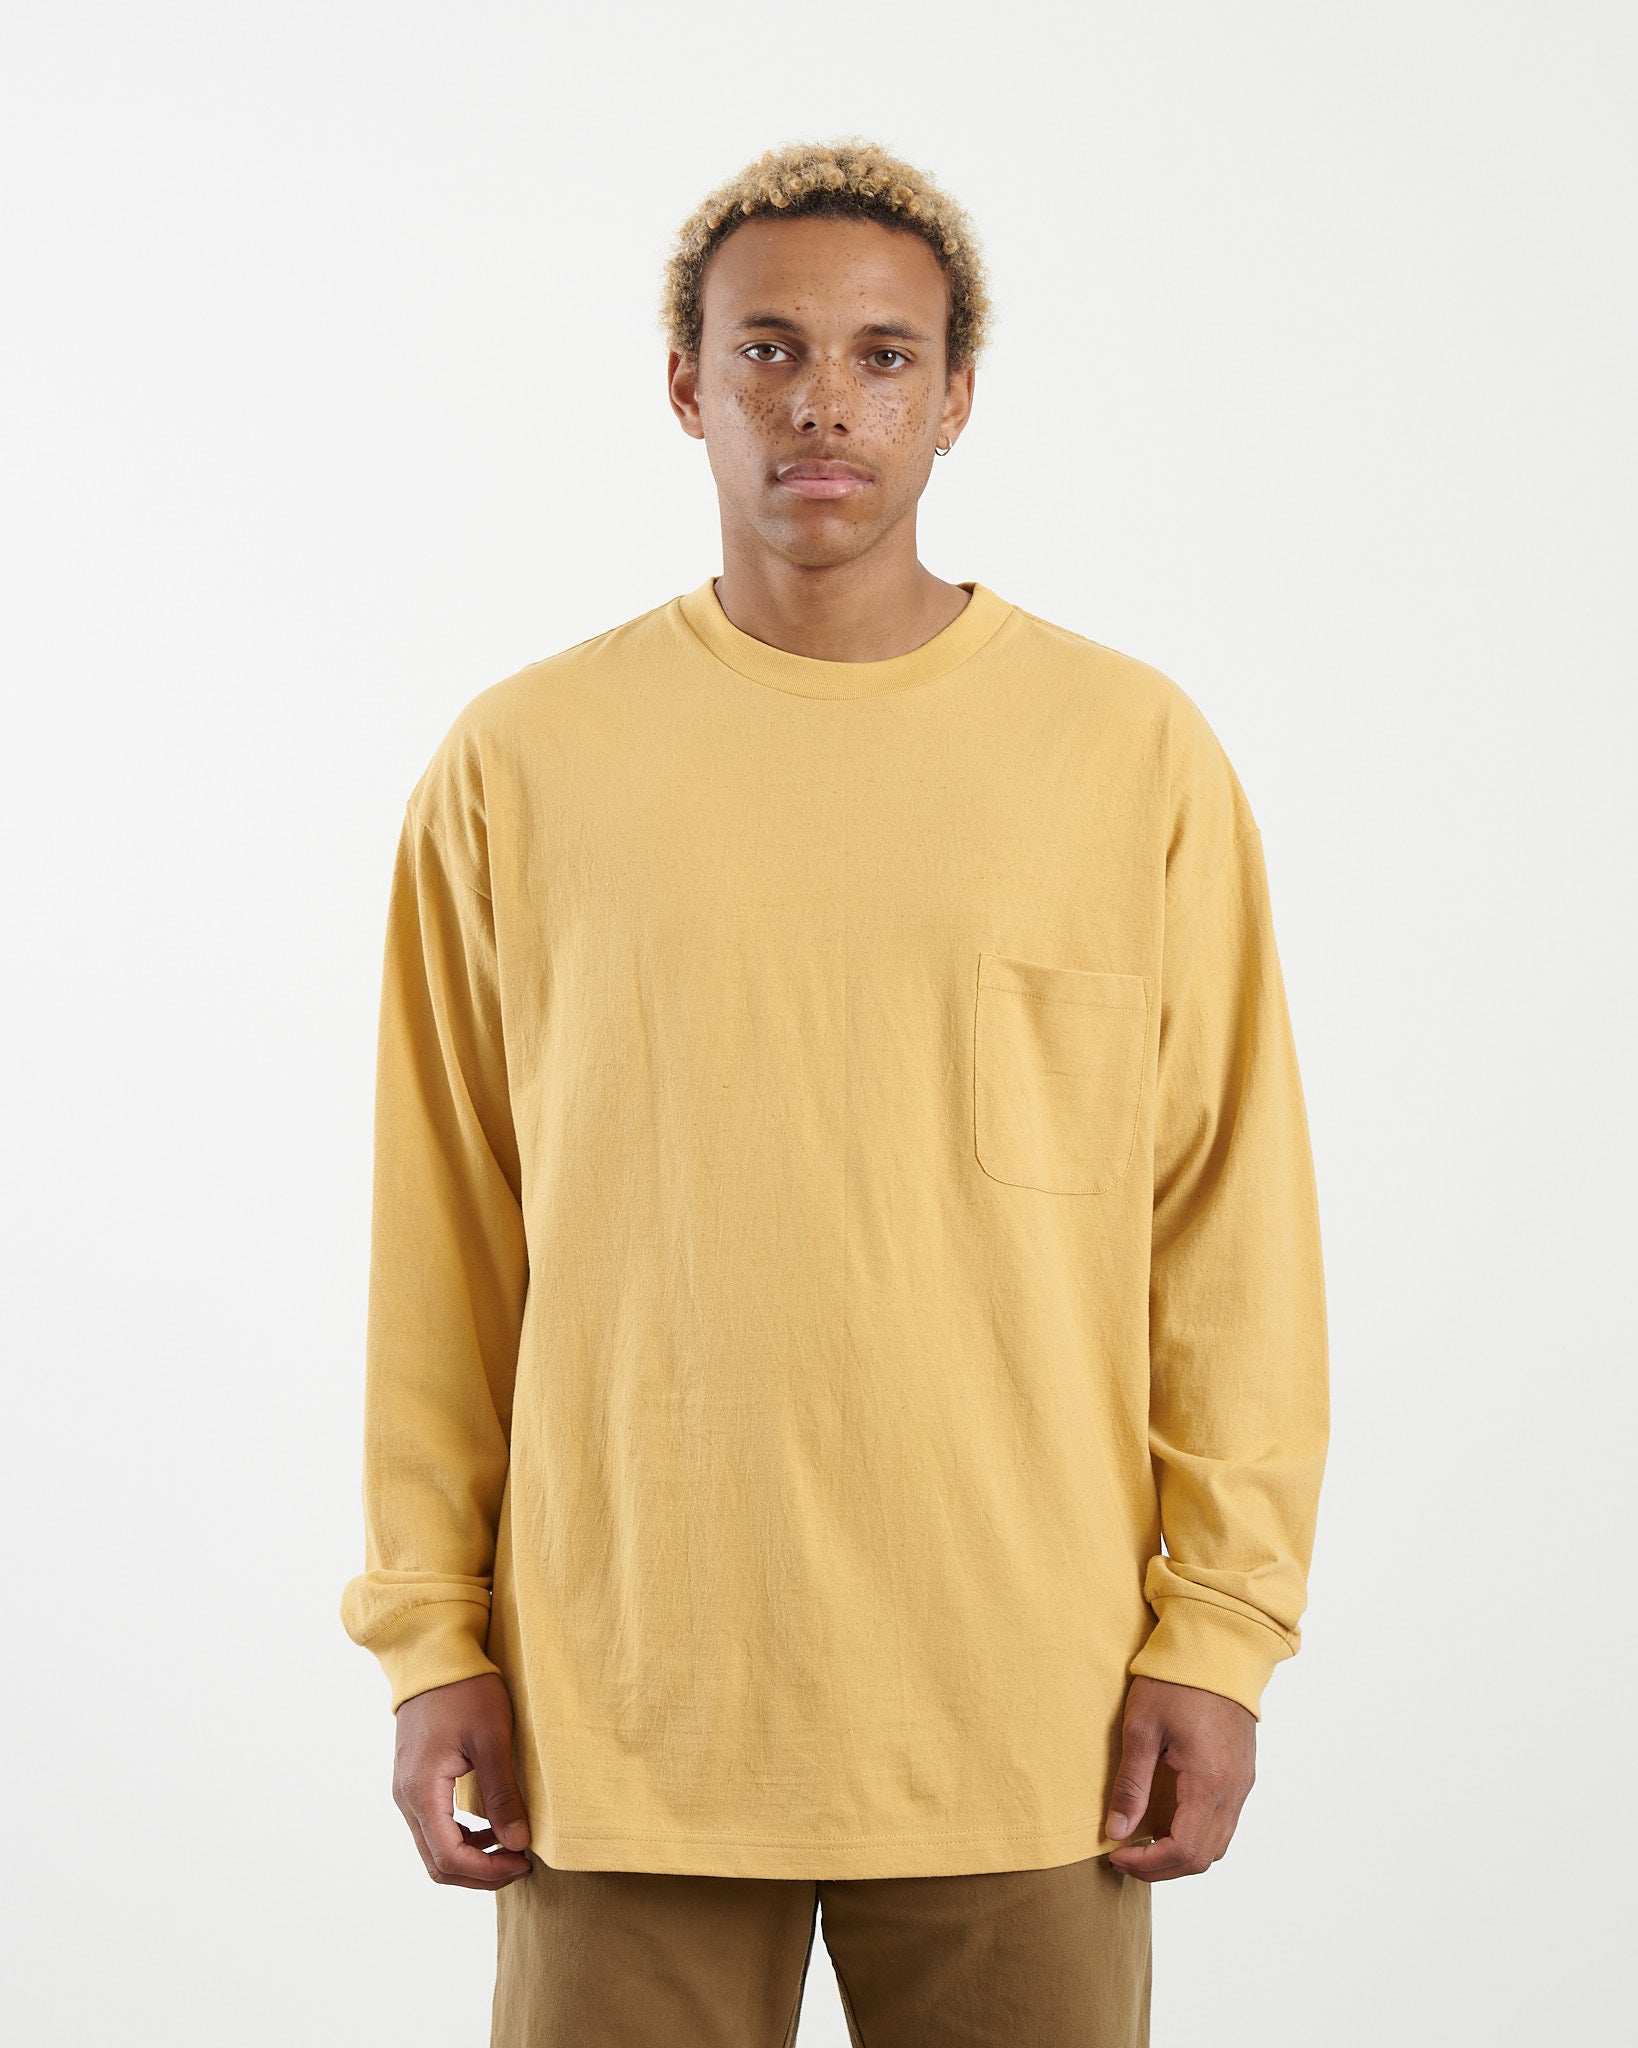 Recycled Natural Dye Long Sleeve Tee in Mustard